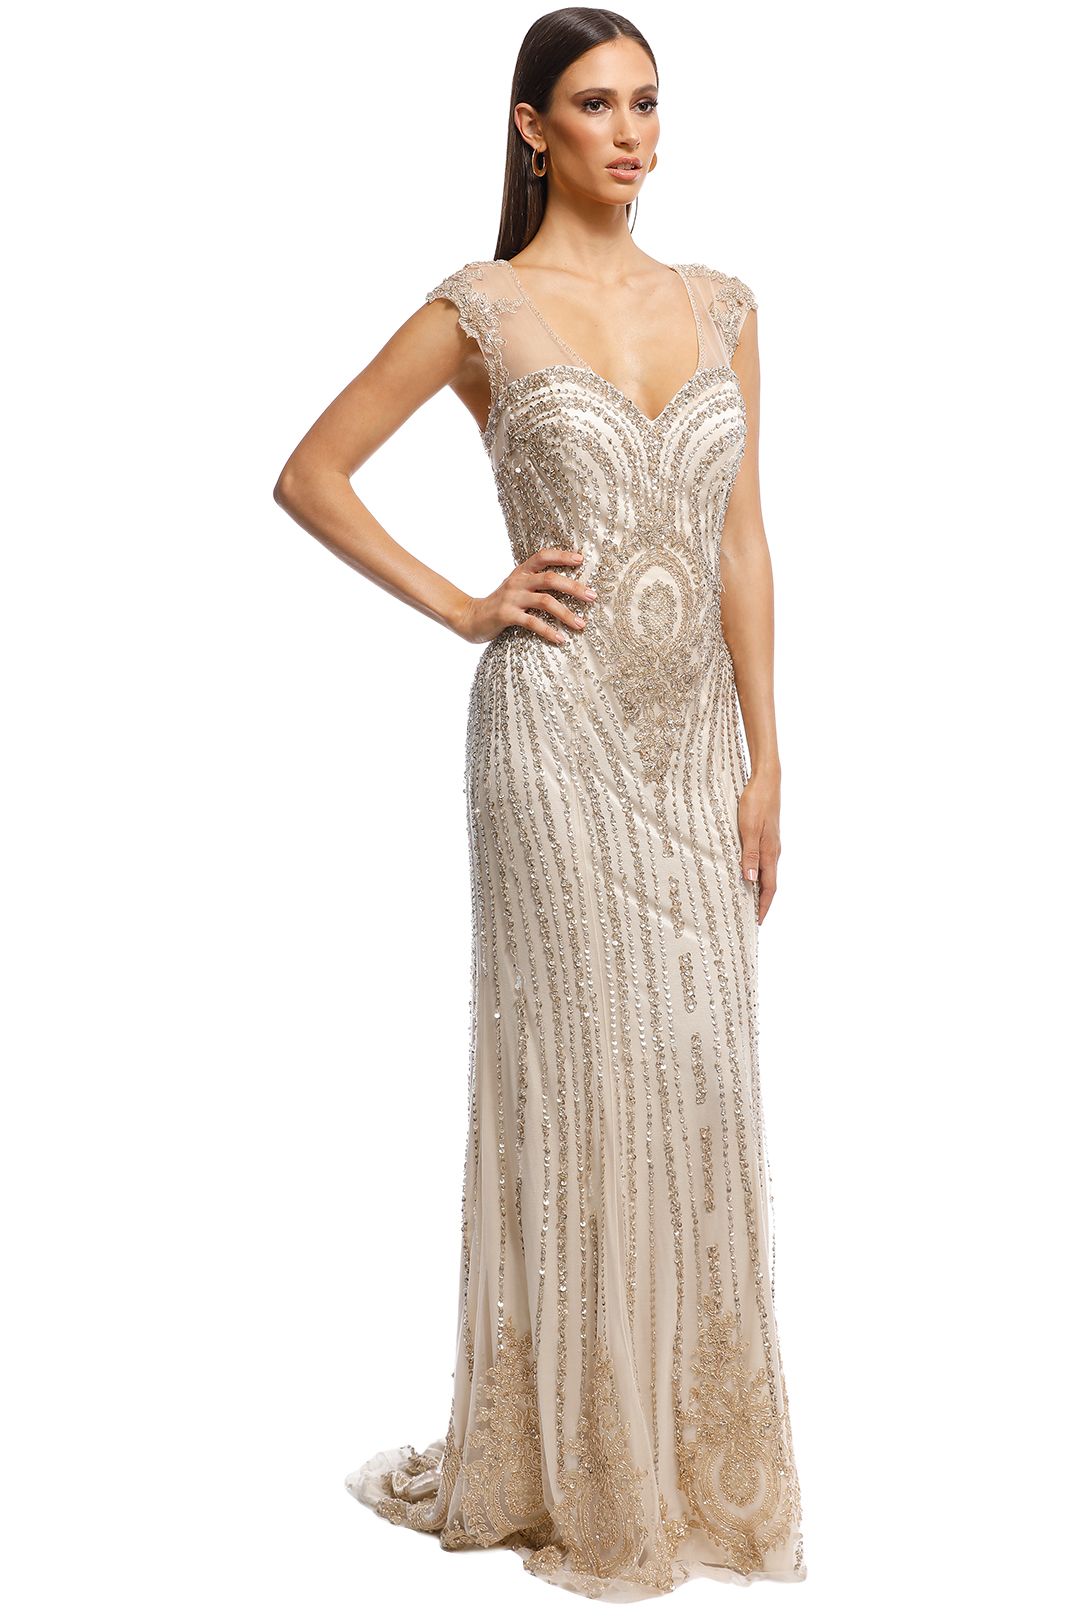 Tinaholy - Angelina Sequin Gown - Gold - Side